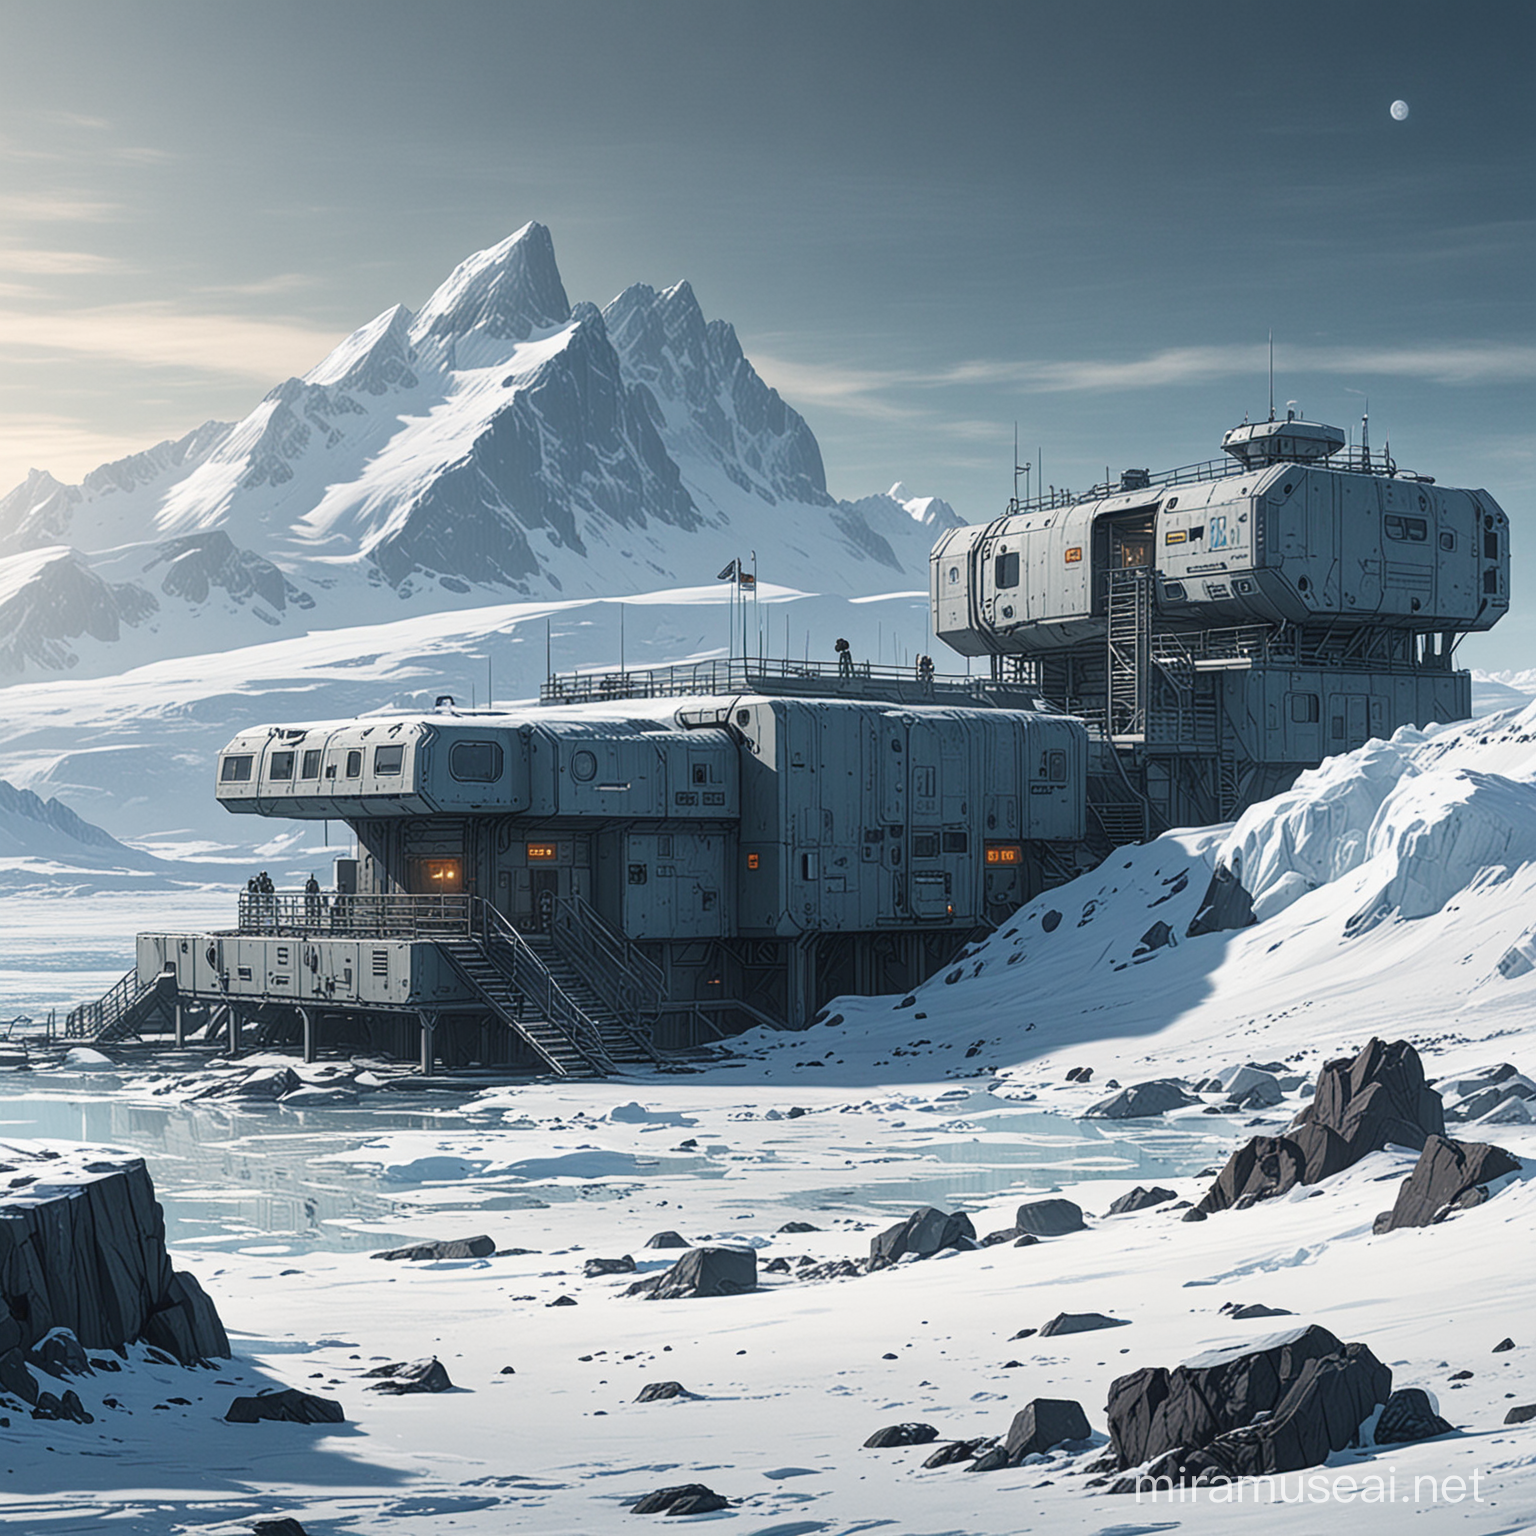 SciFi Dystopia Antarctic Station in Comics Style